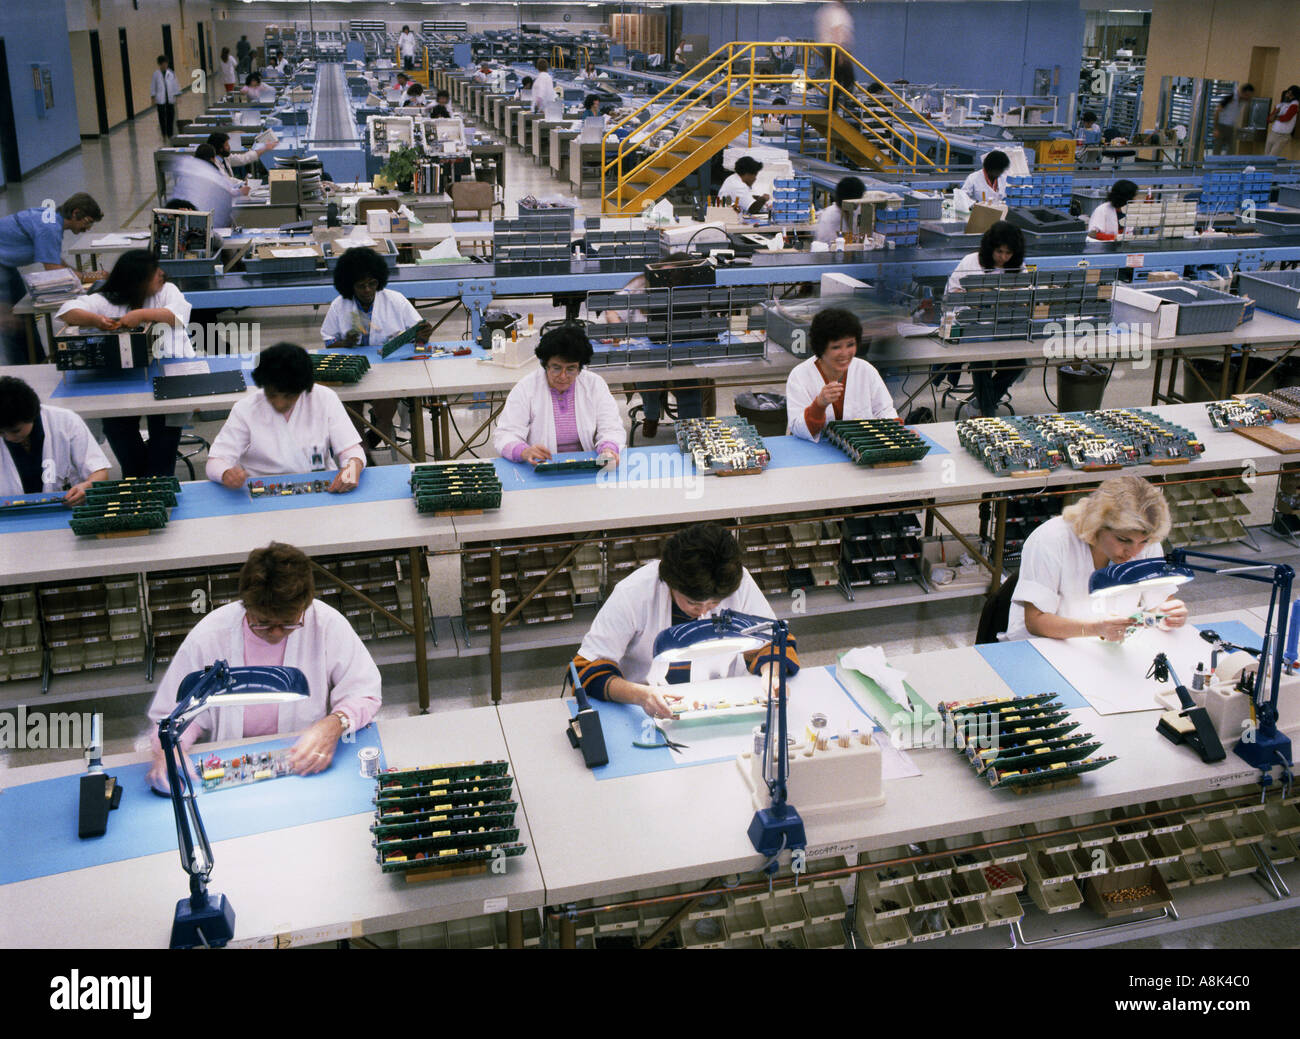 Electronic assembly line in a manufacturing plant Stock Photo